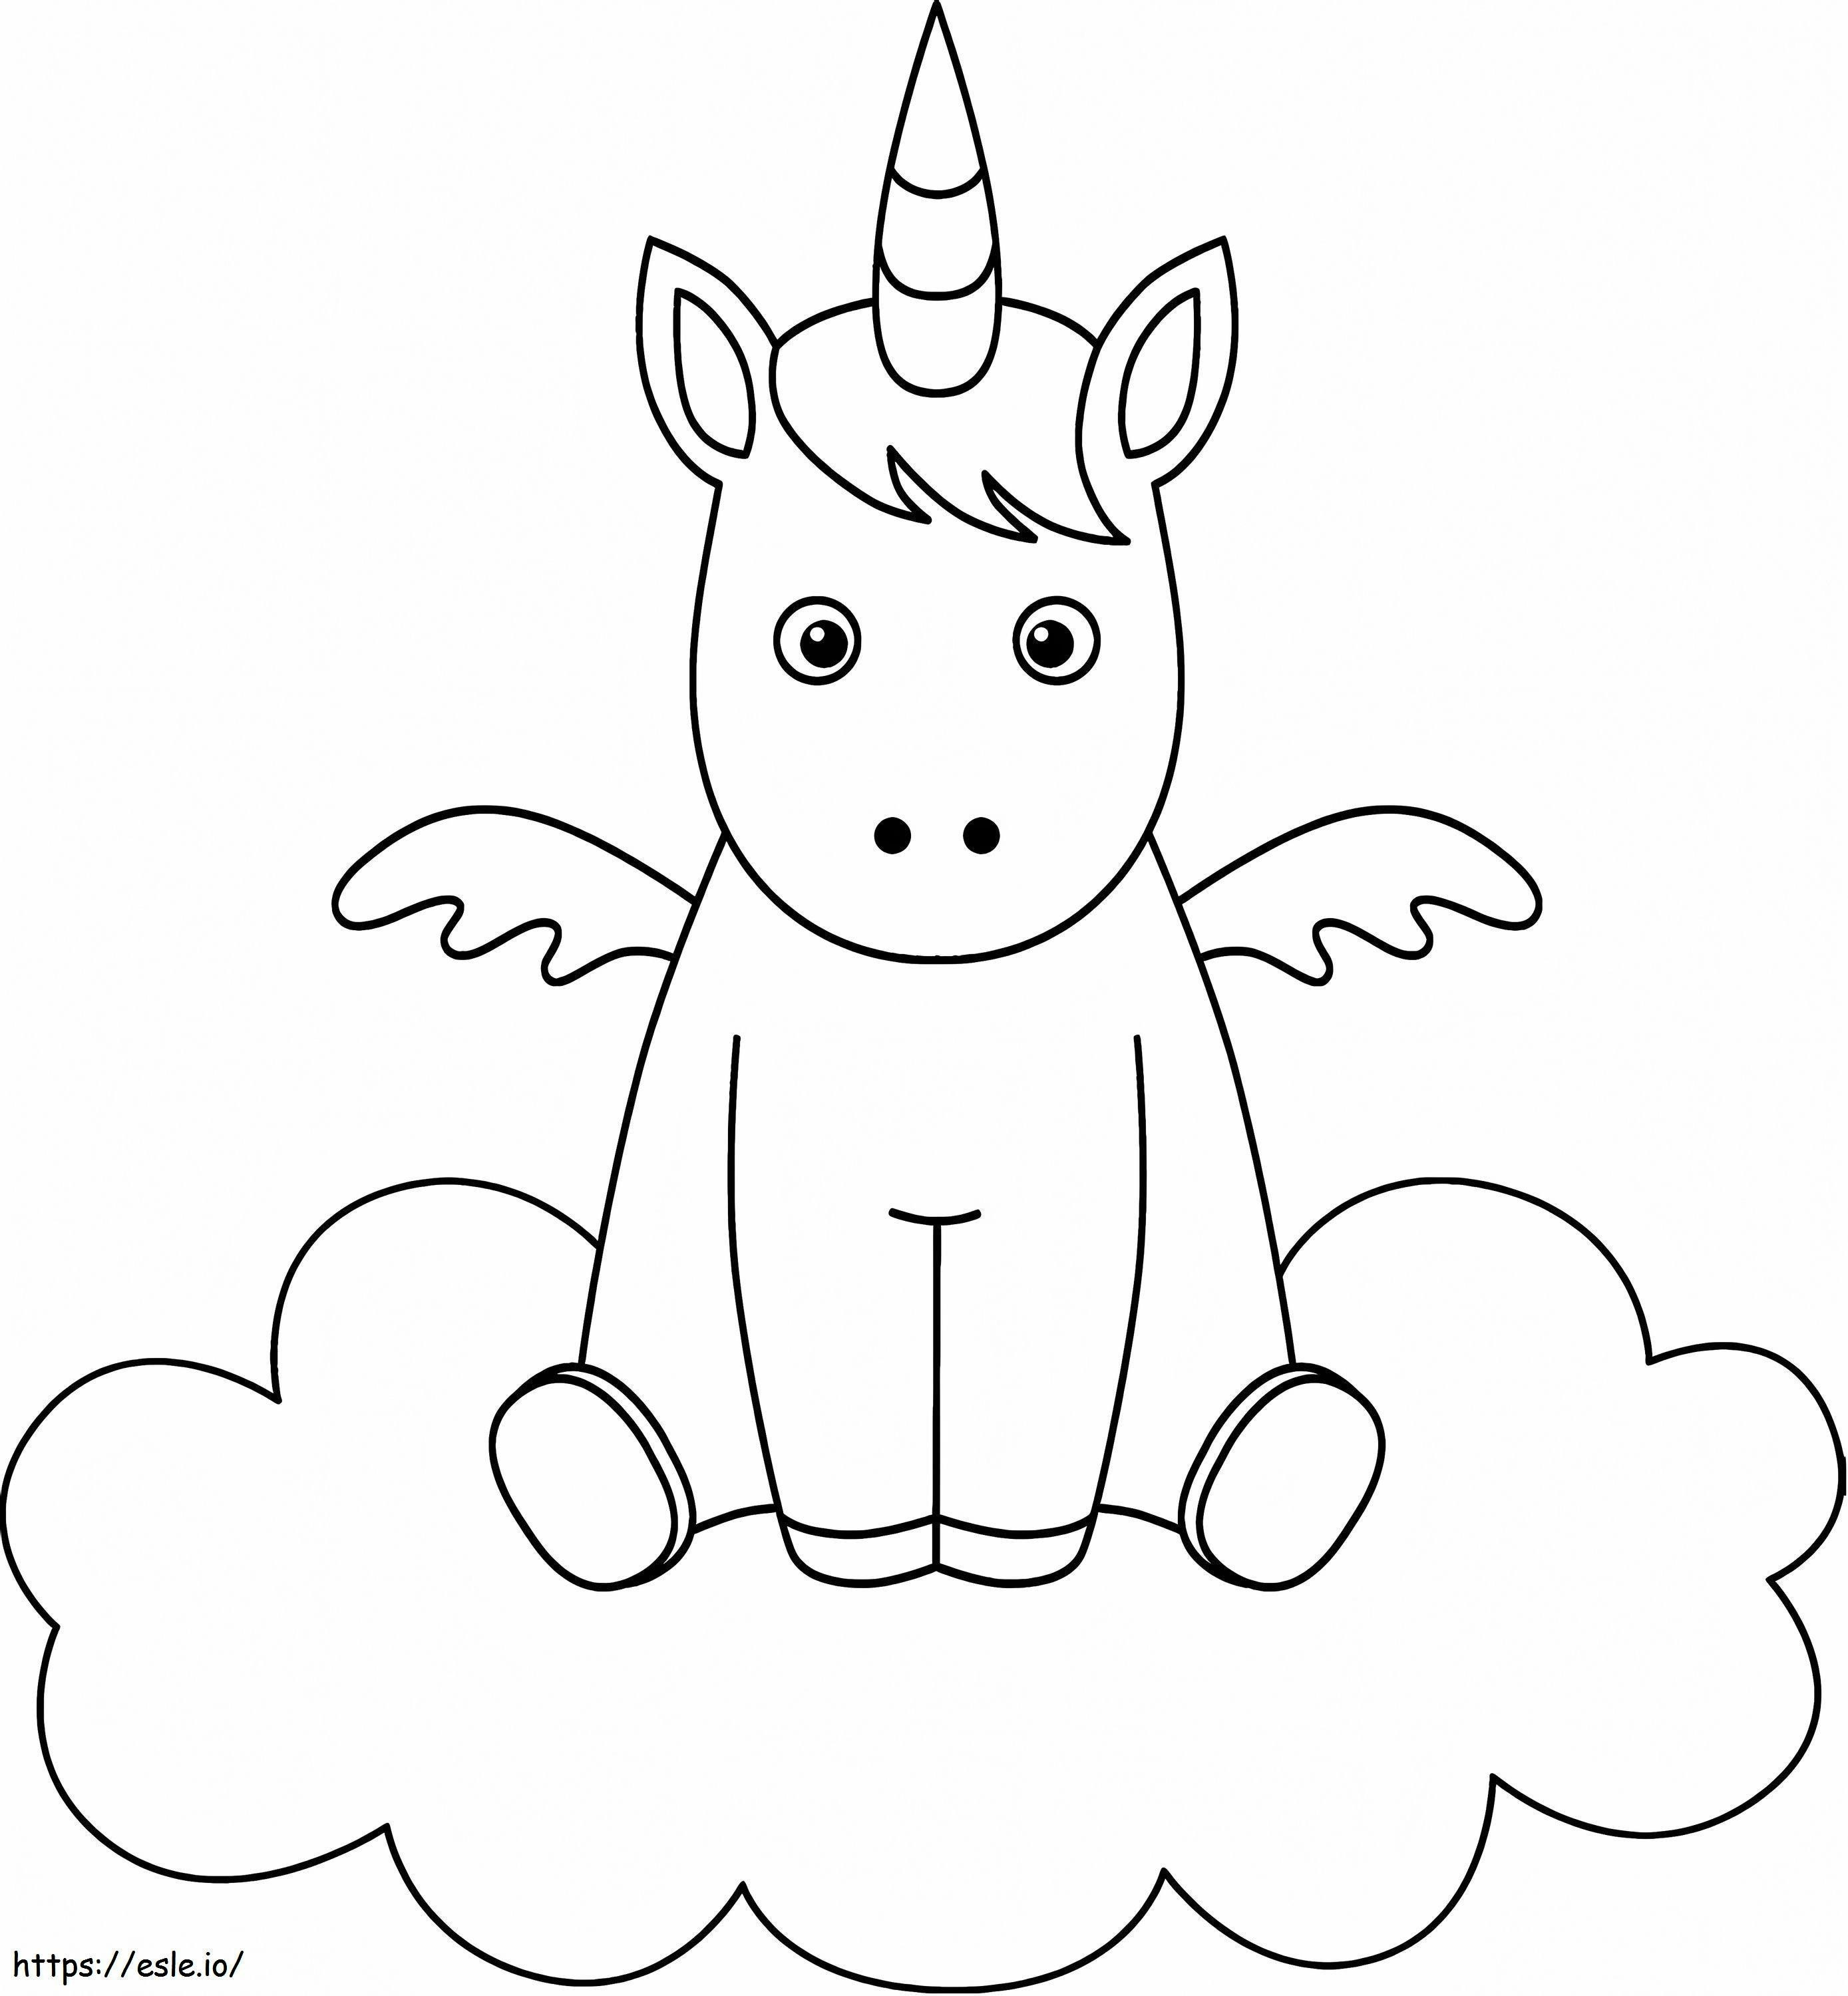 1563325064 Little Unicorn On Cloud A4 coloring page